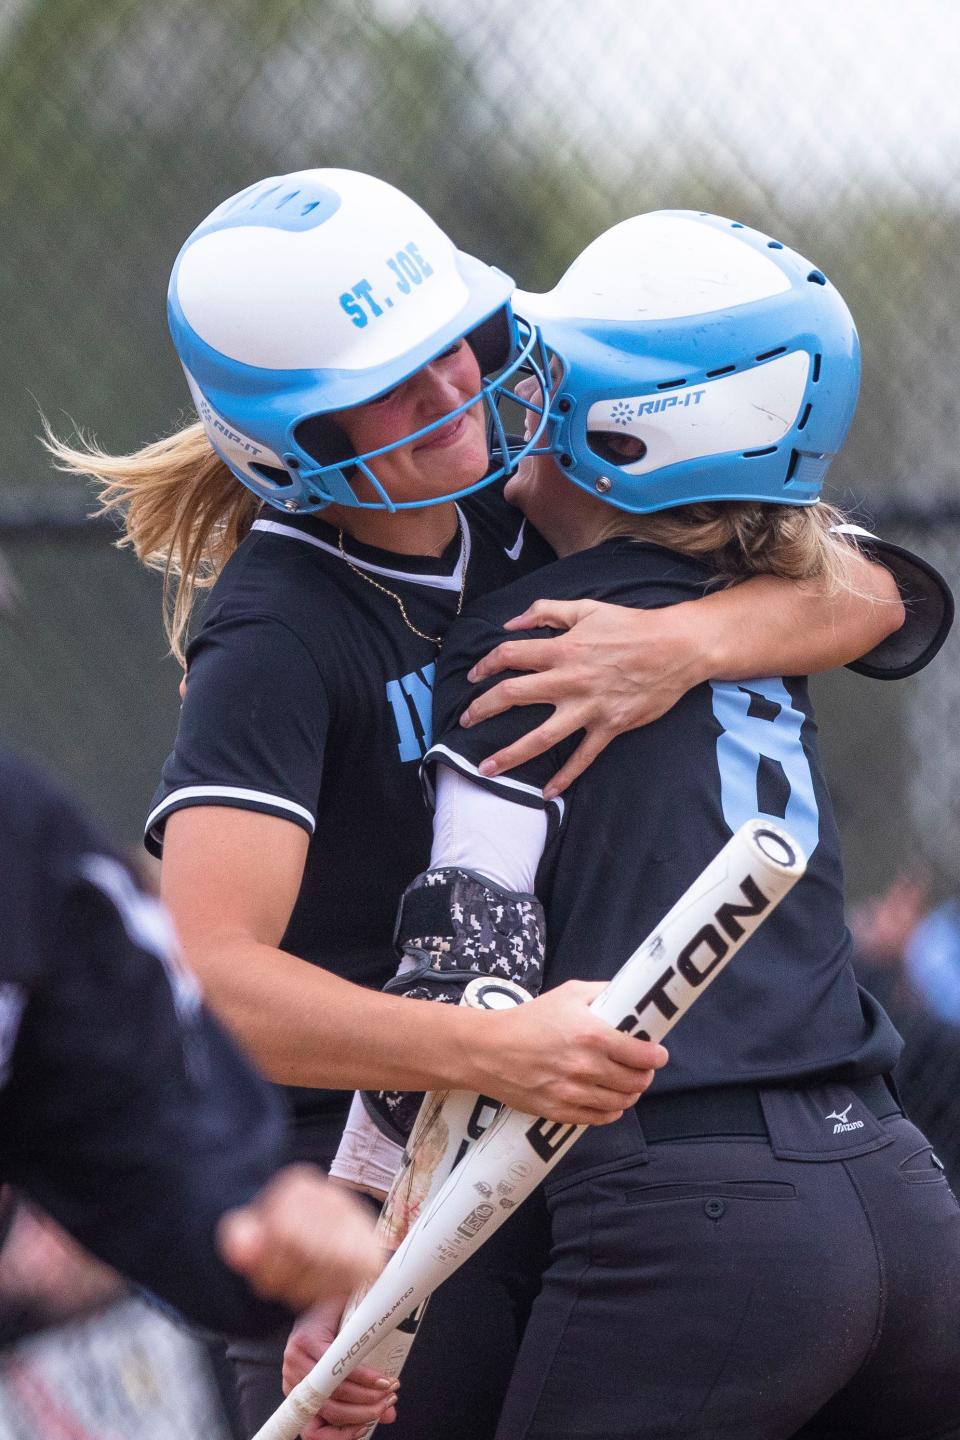 Saint Joseph's Riley Zache (8) gets a hug from Berkley Zache (19) after hitting a home run during the Penn vs. Saint Joseph softball game Monday, May 8, 2023 at the Northside Athletic Complex in South Bend.